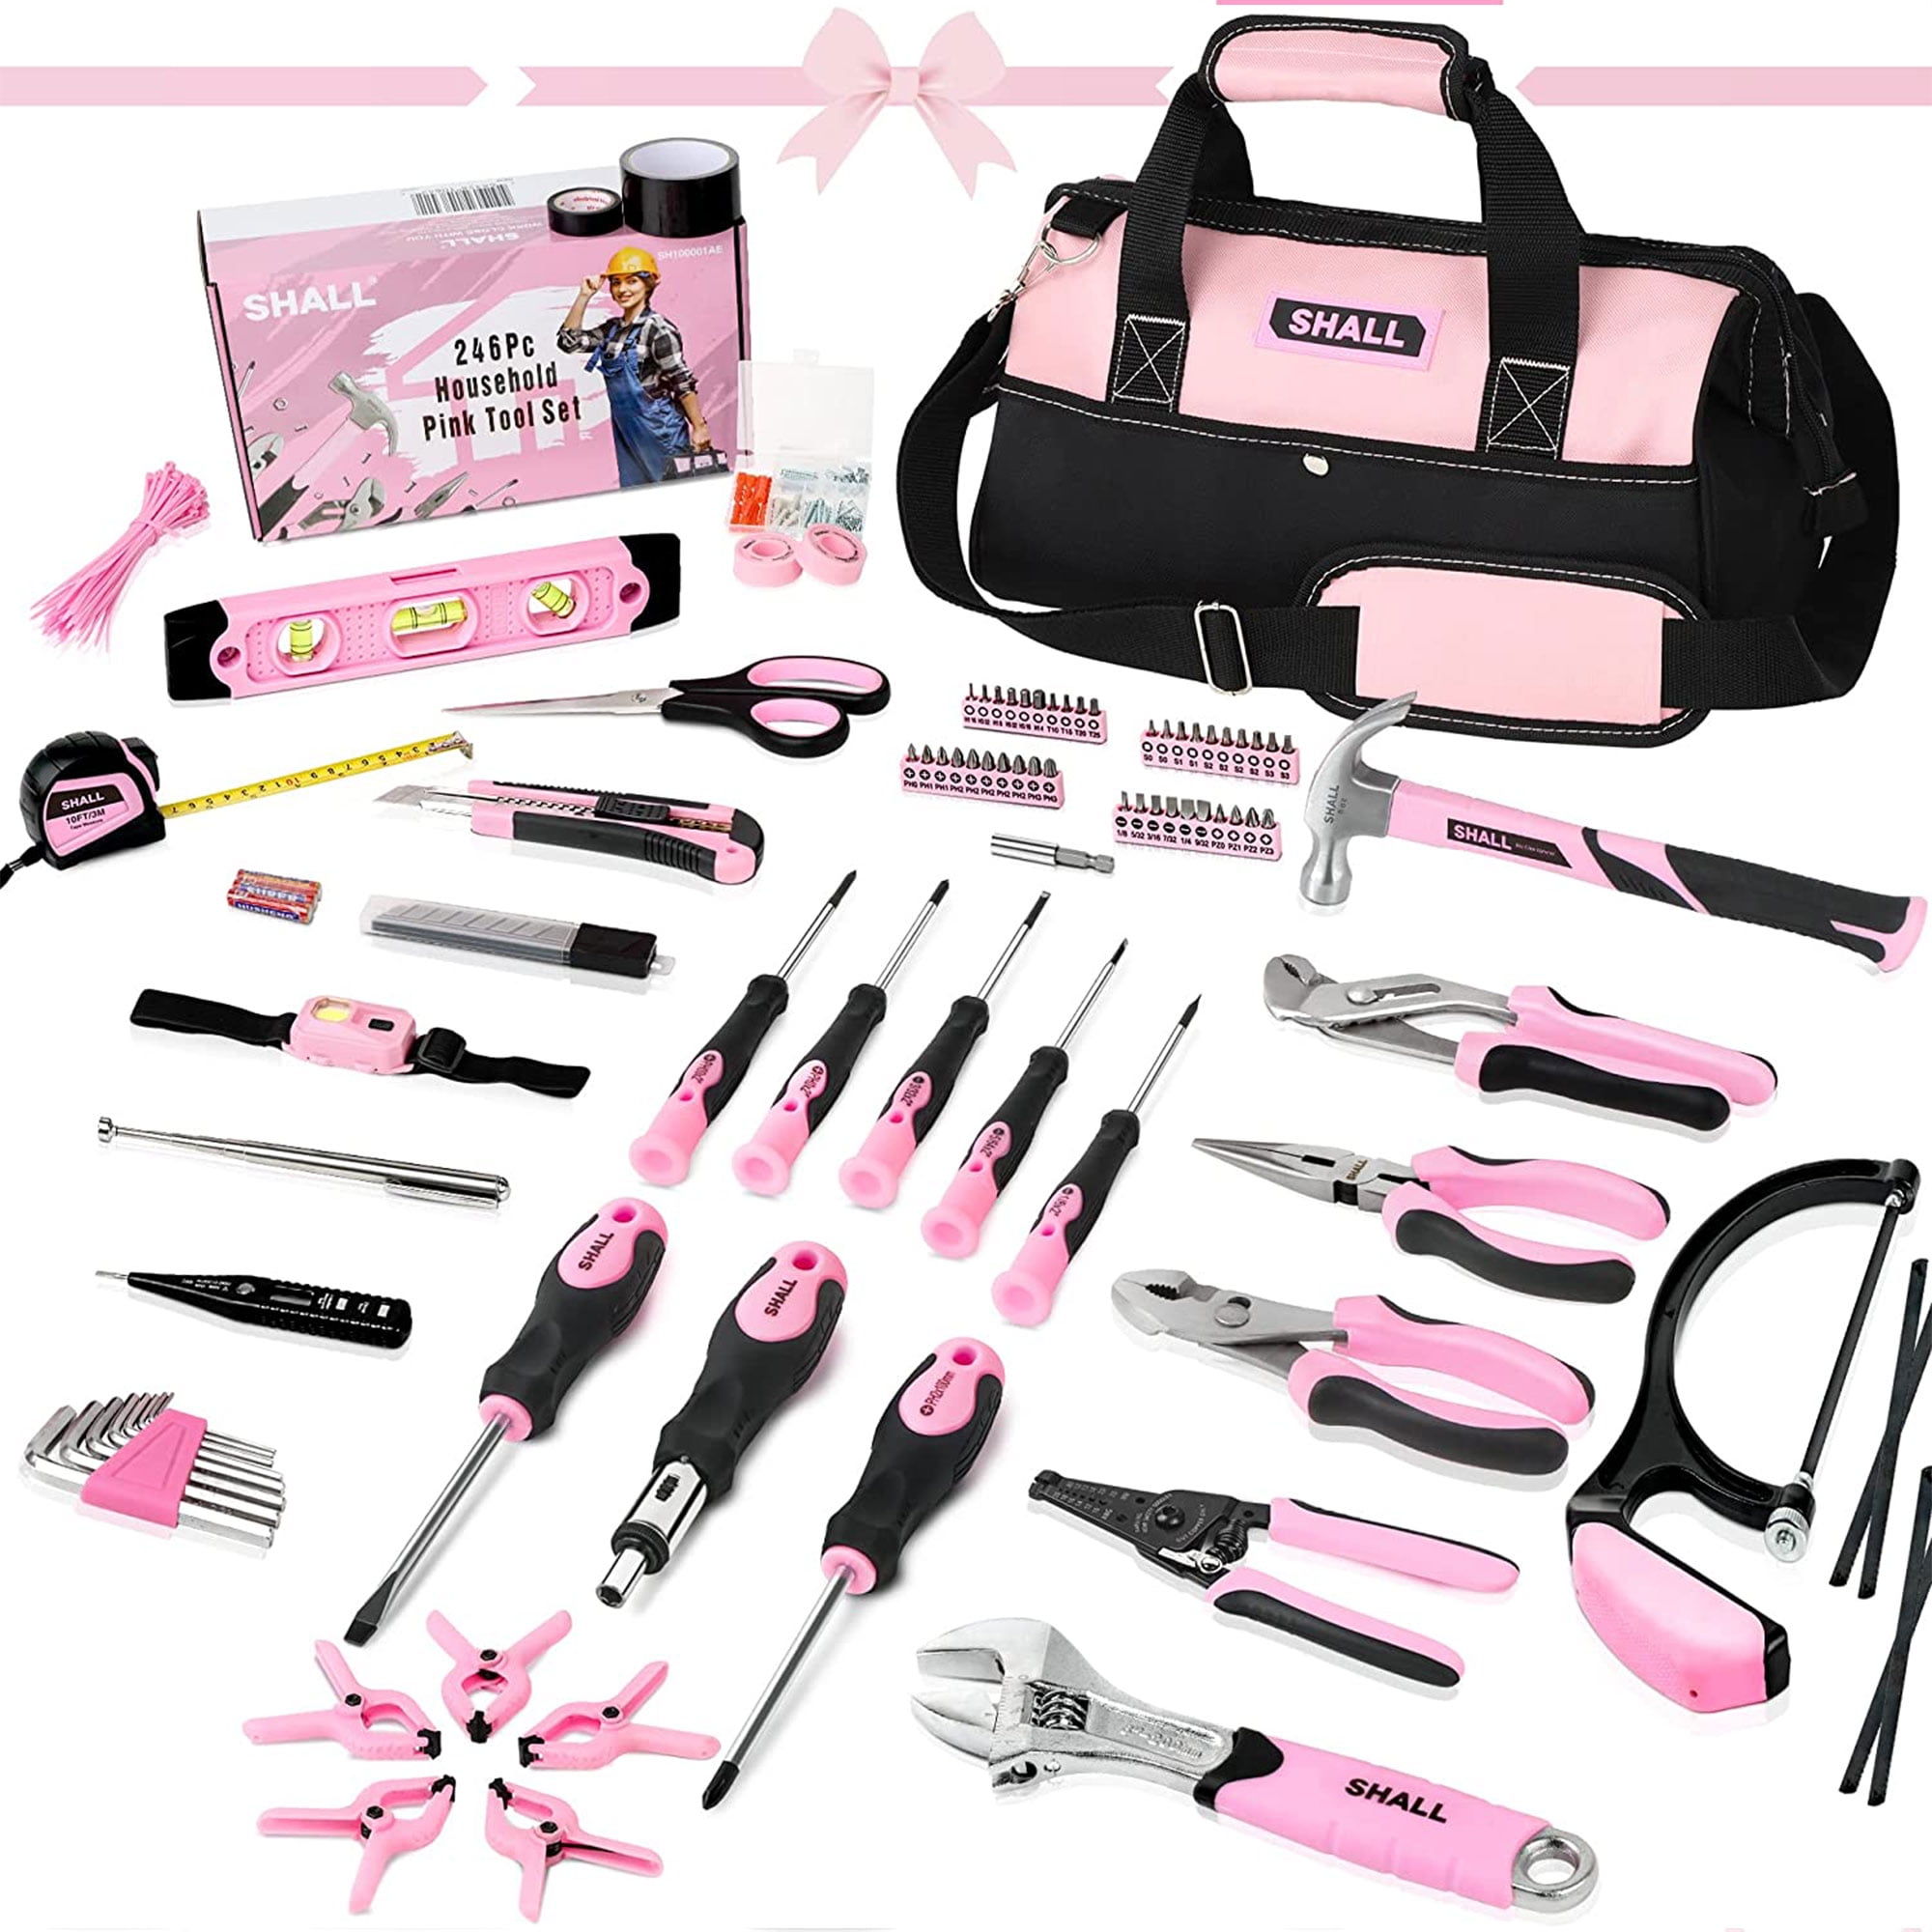 Pink Tool Set Acosea 223-pieces for Women Tool Kit with 13-inch Wide Mouth Open Bag The Basic Set Is Perfect Home Maintenance at MechanicSurplus.com